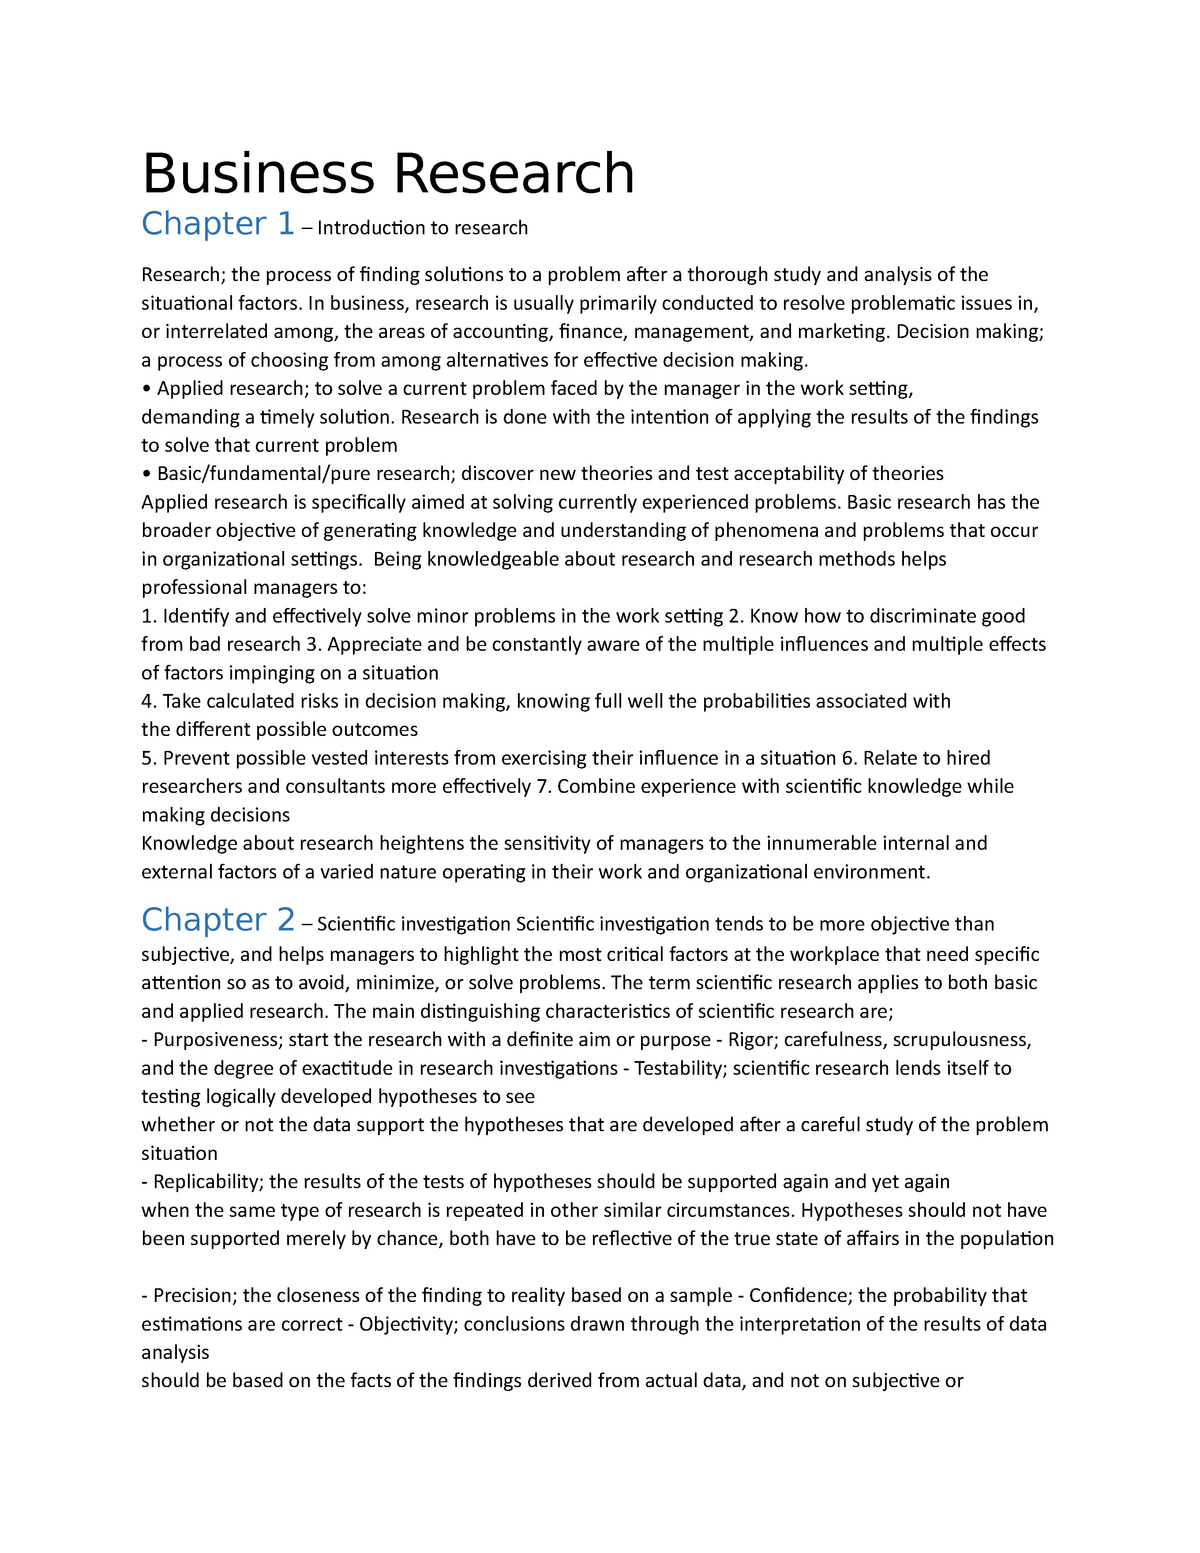 business research chapter 1 example